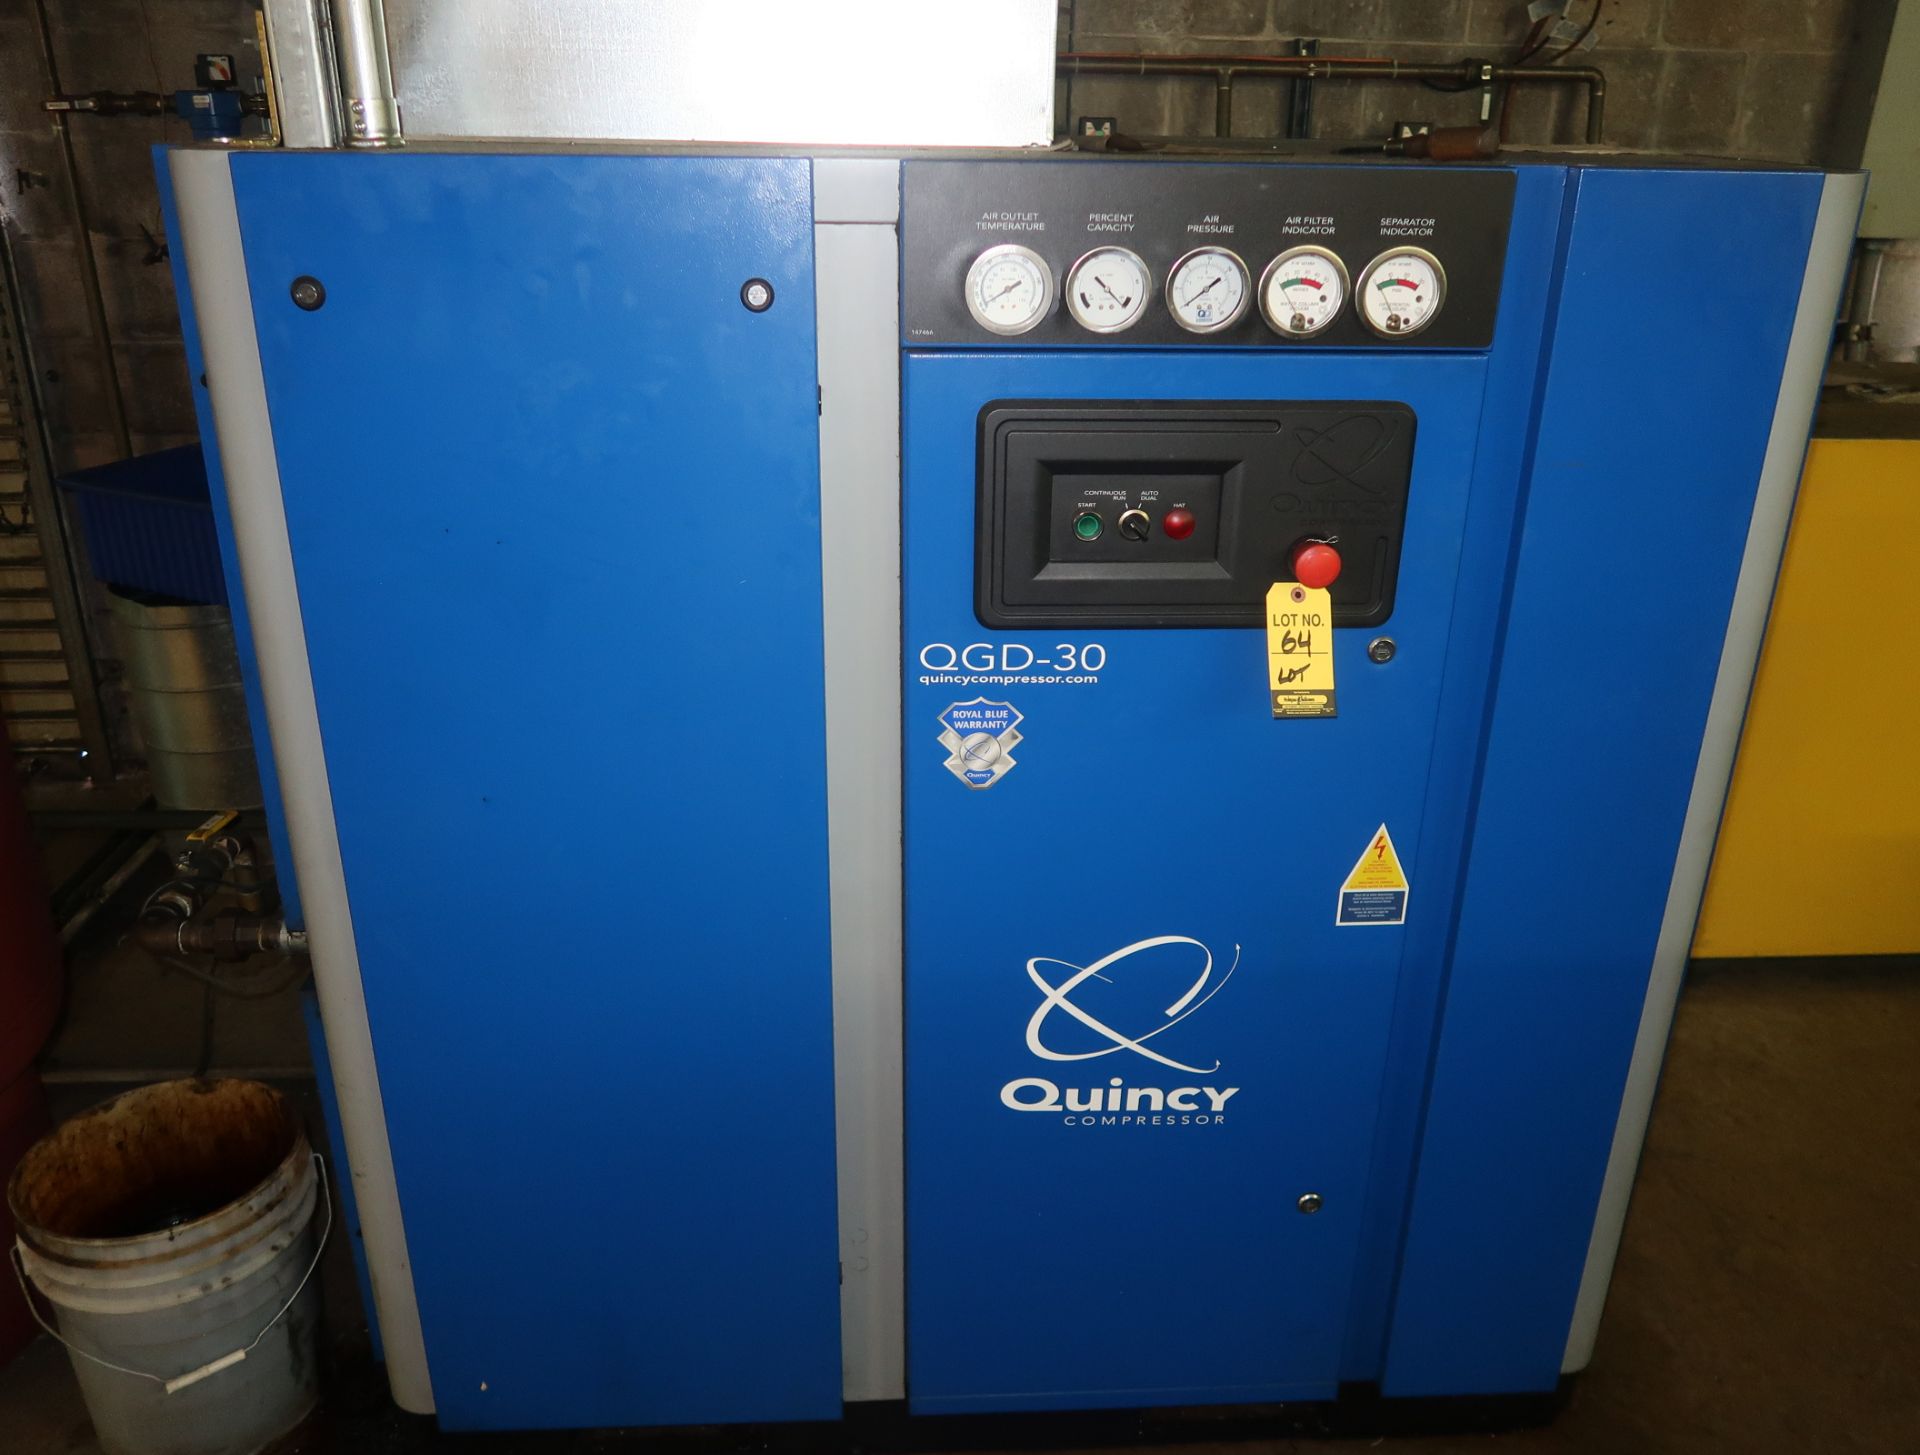 2010 QUINCY QGD-30 ROTARY SCREW AIR COMPRESSOR W/QUINCY DRYER AND HORIZONTAL AIR RECEIVER. 48,785 - Image 2 of 4